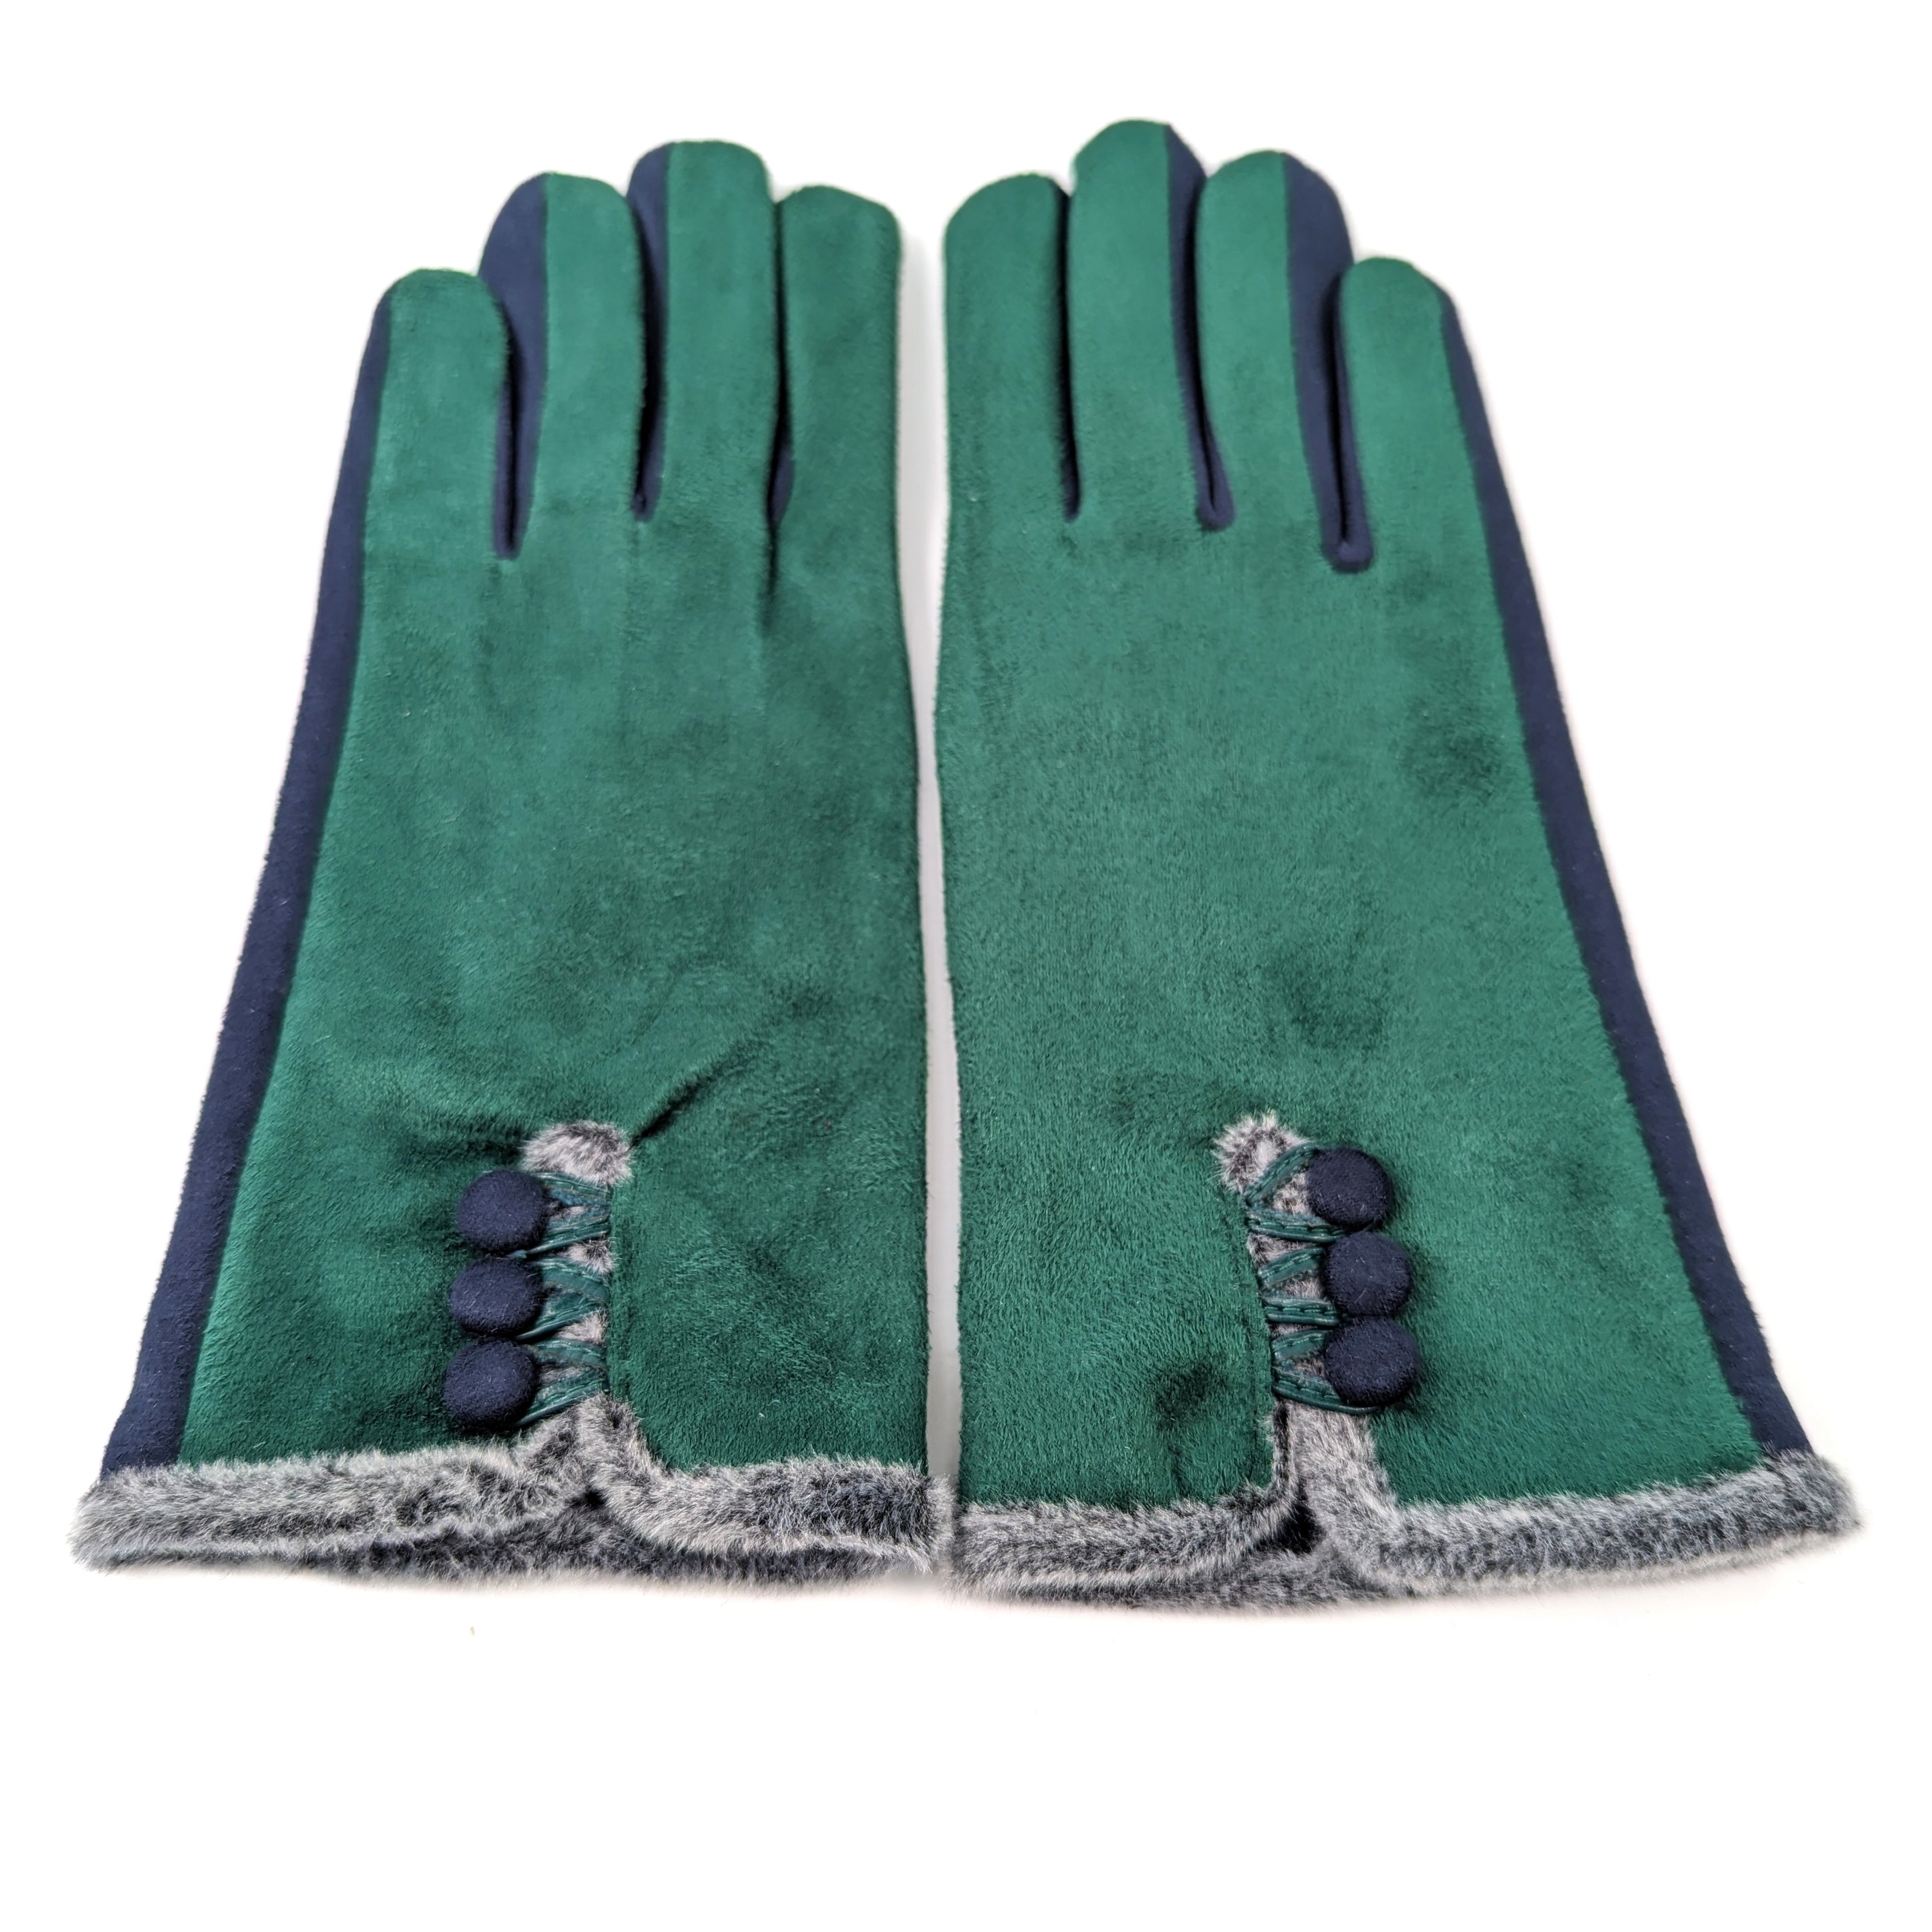 Bicolour Suede Effect Gloves with Faux Fur Trim - Green/Navy